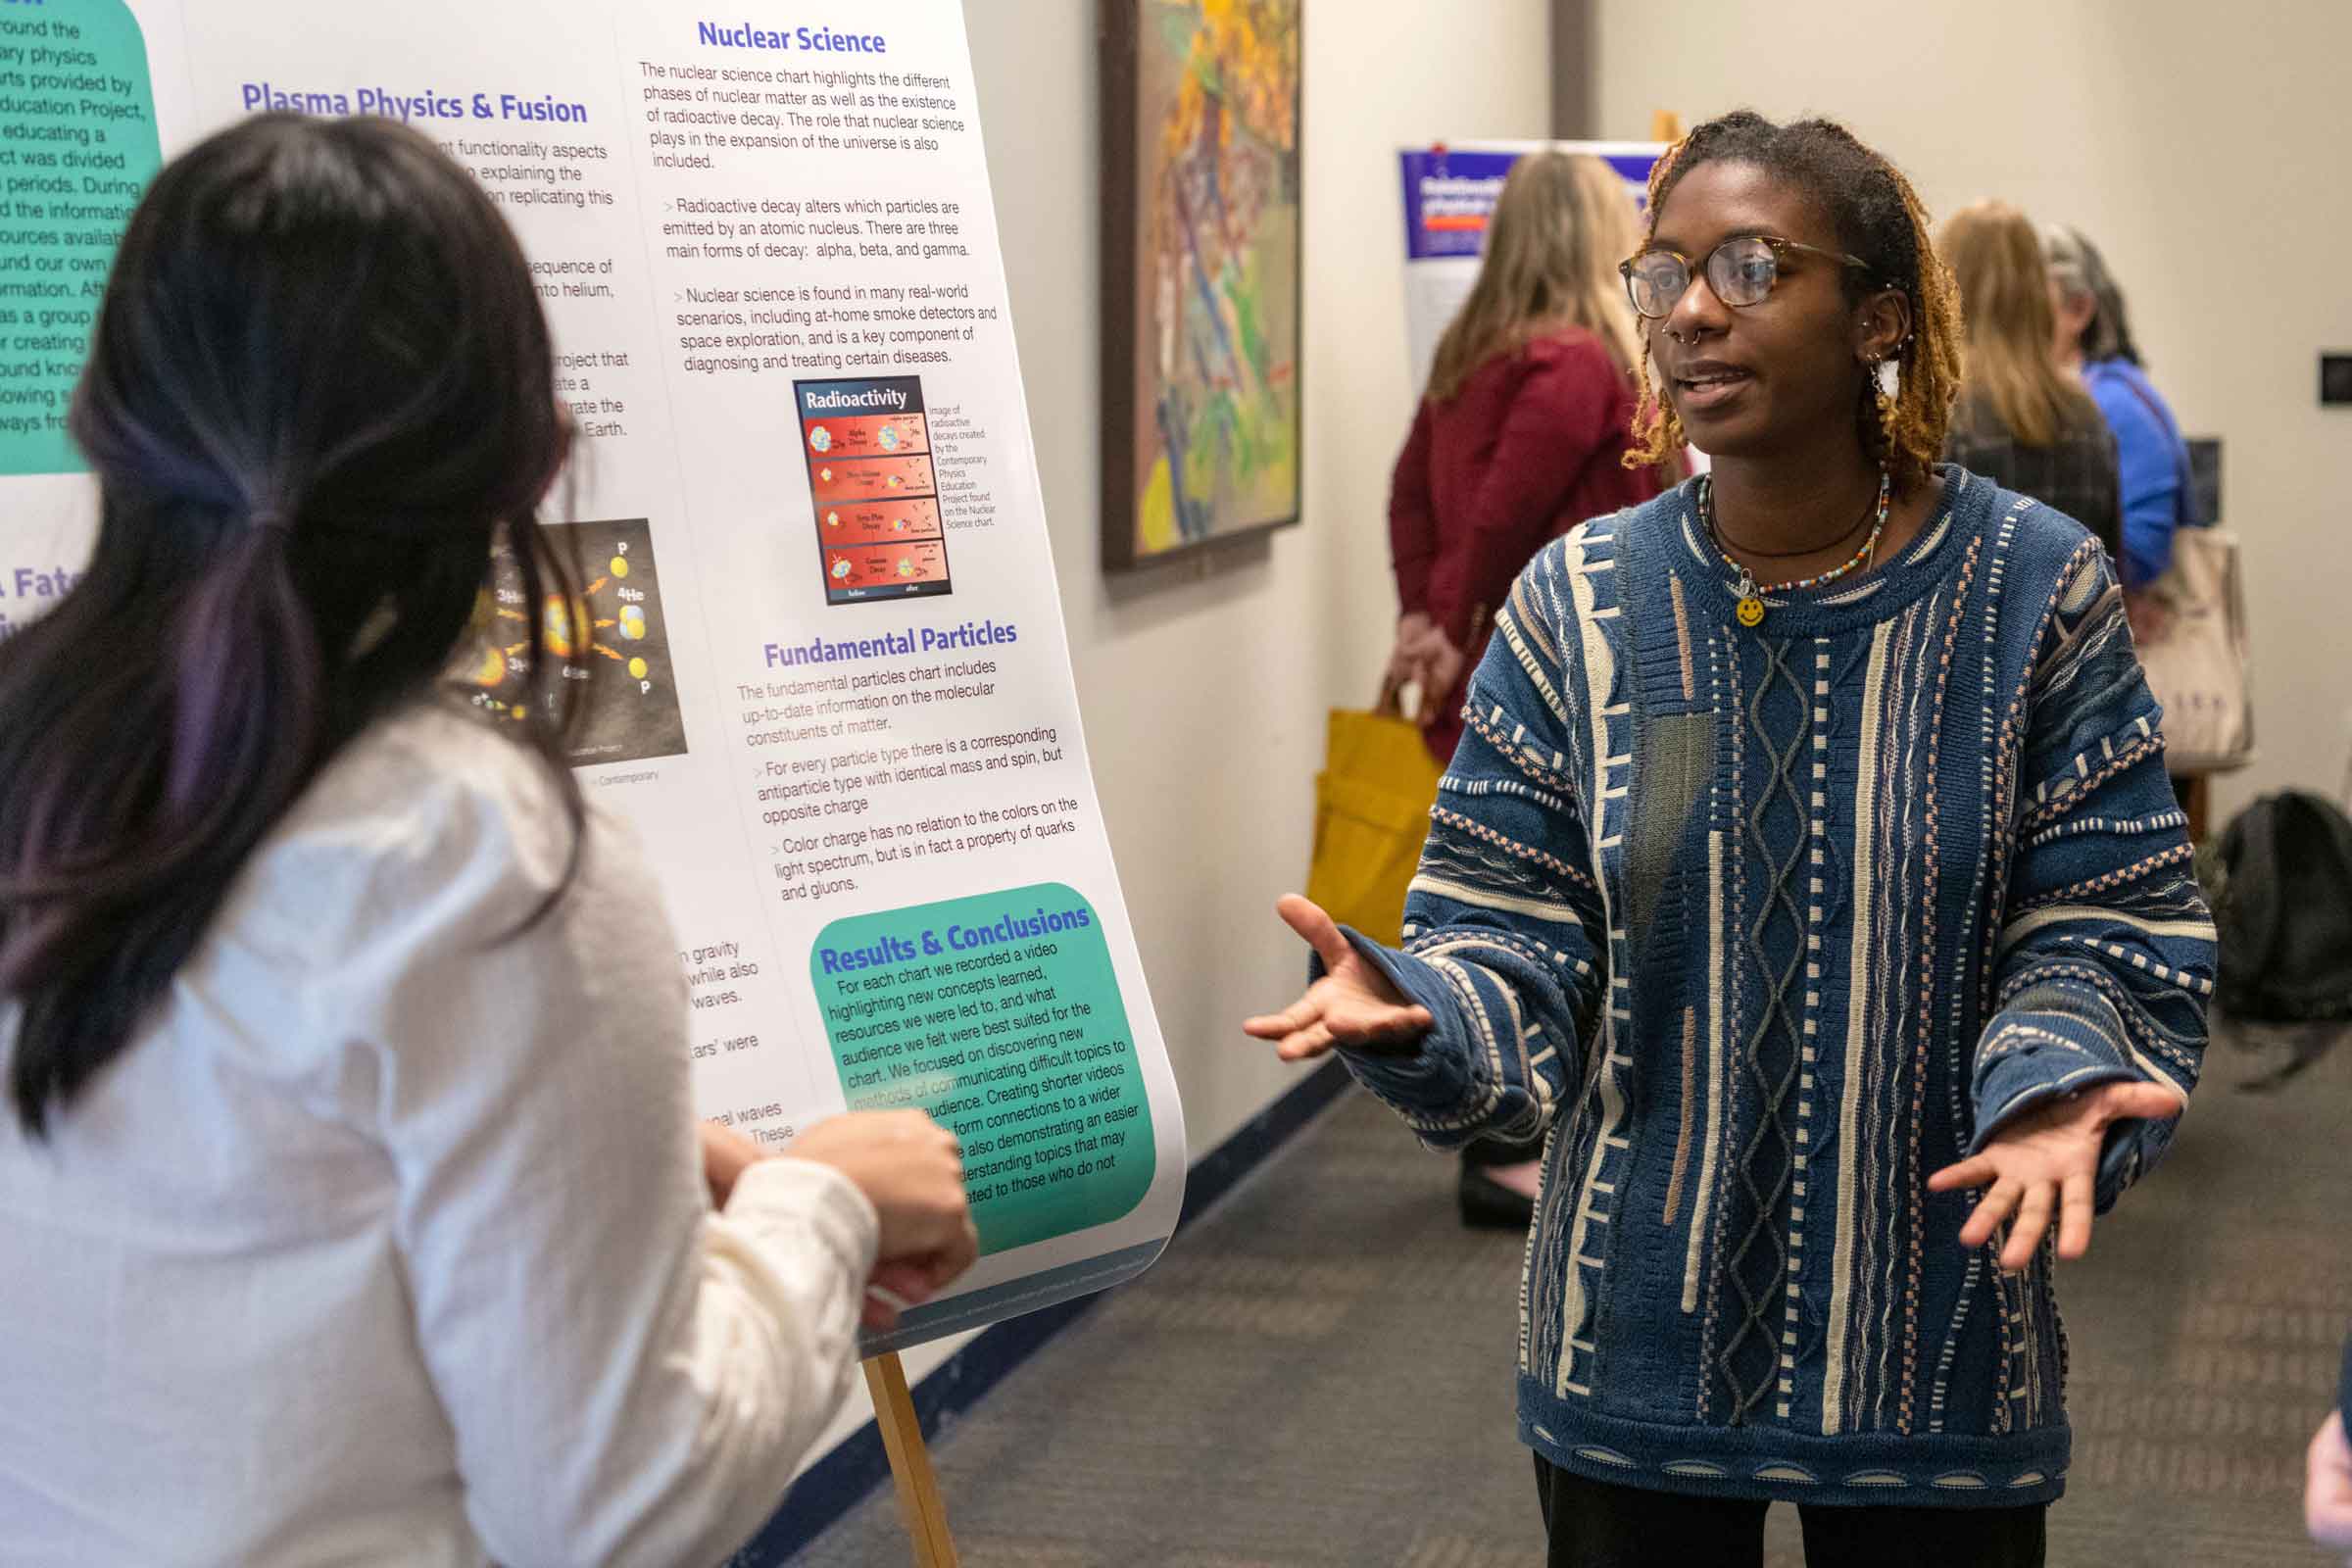 Student standing in front of a poster explaining it while gesticulating to another person